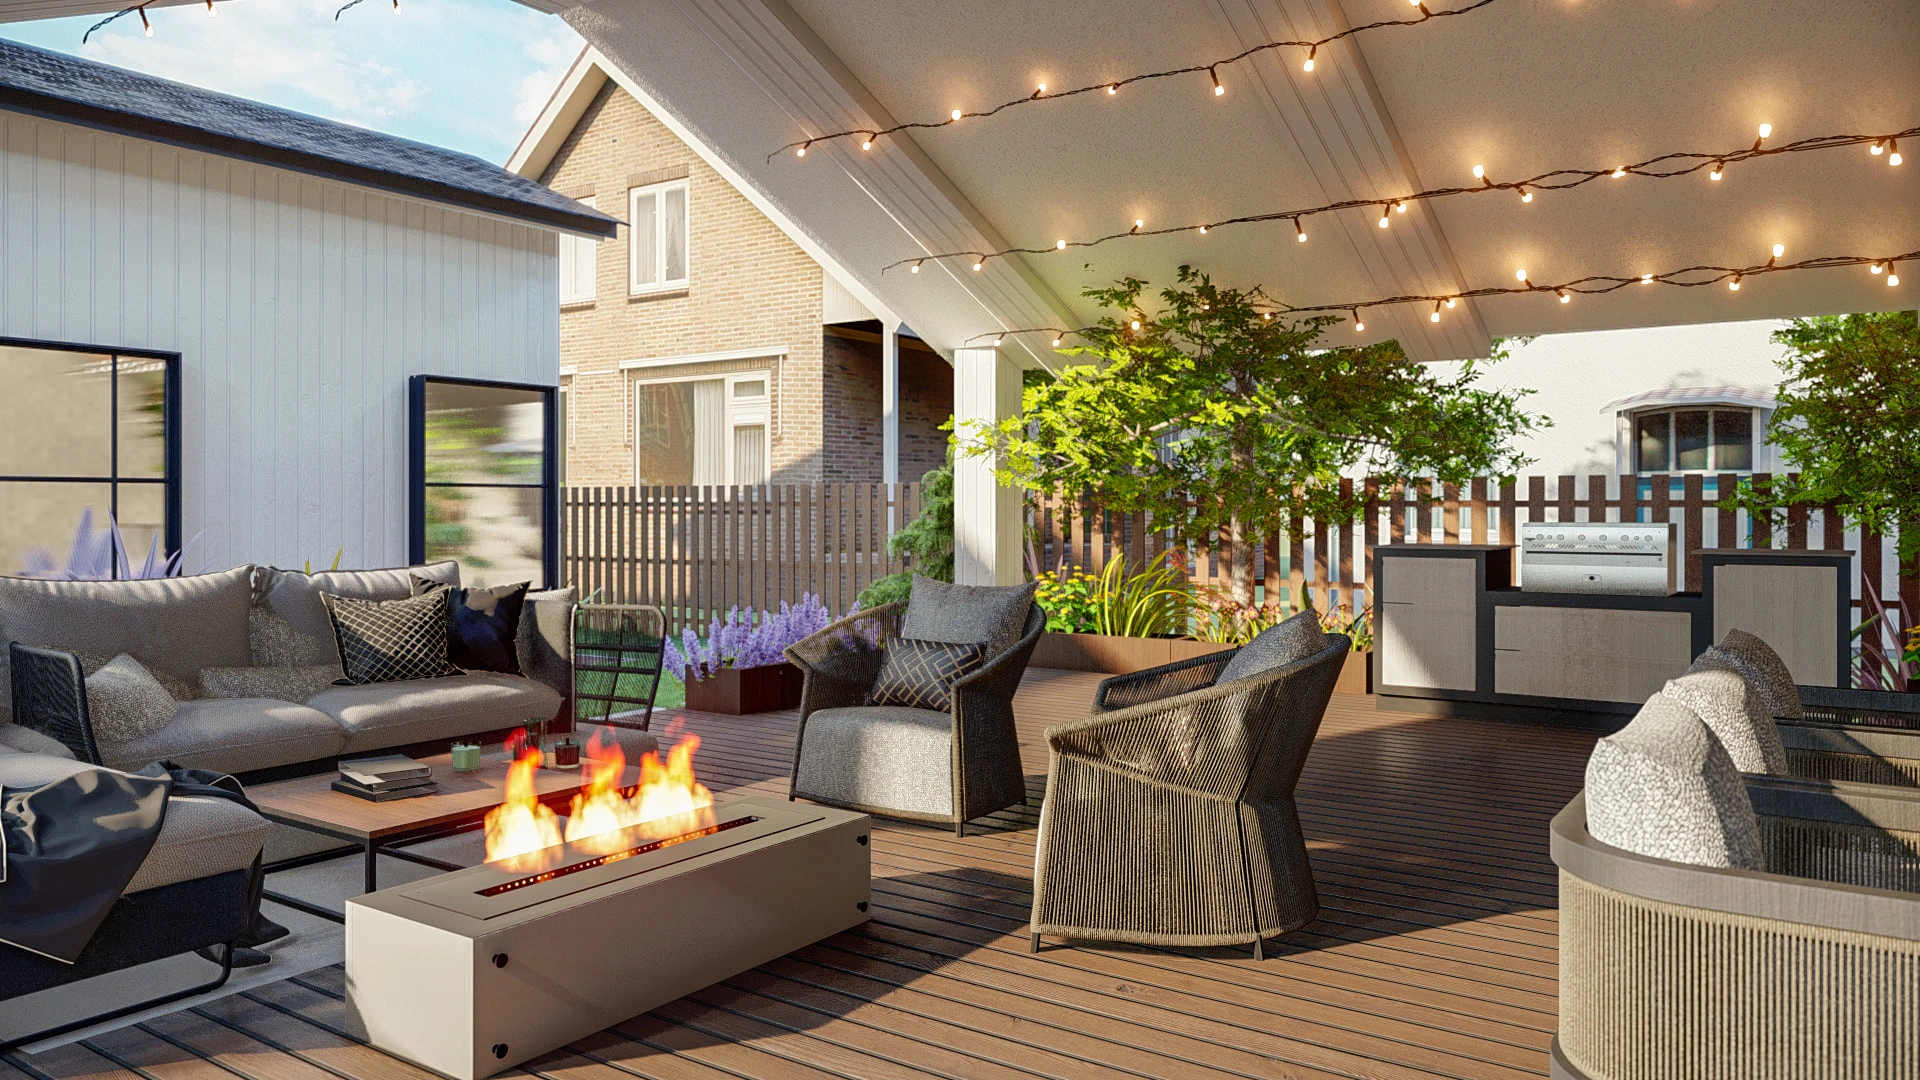 A modern outdoor living space with a sleek fire pit, comfortable seating, and lush landscaping.